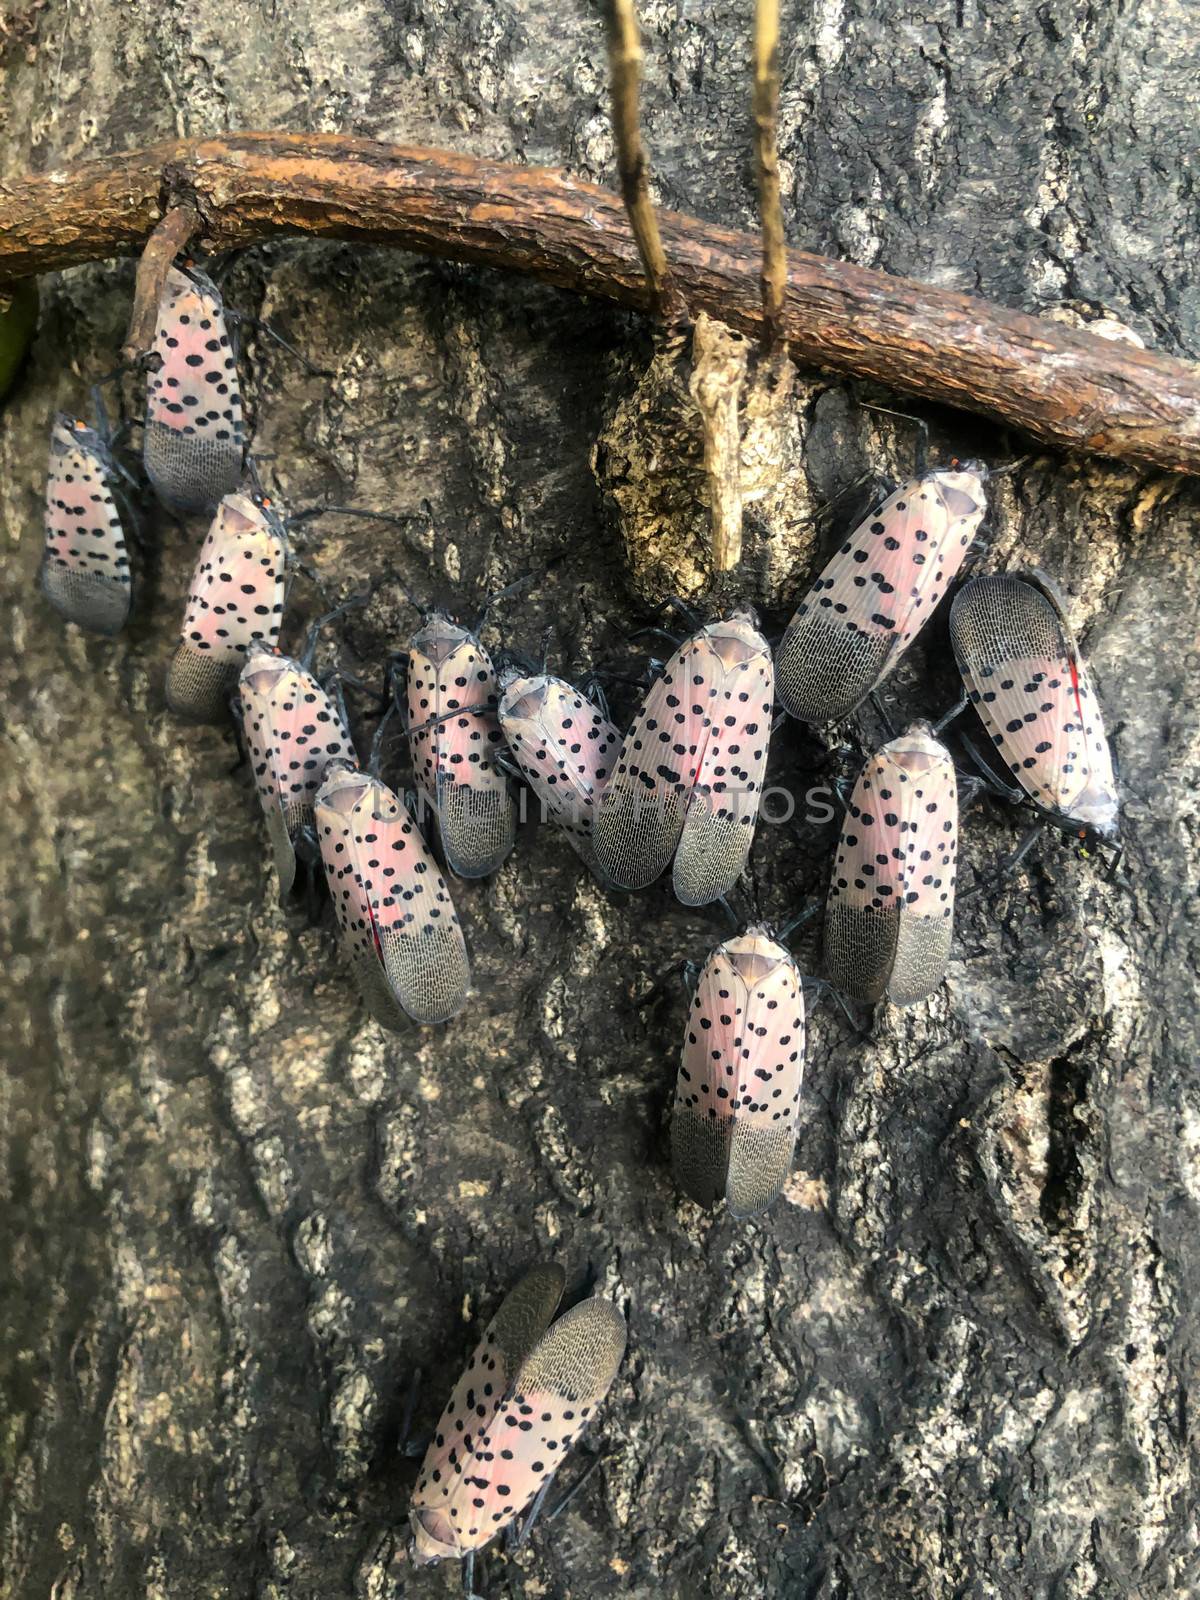 Close up of Spotted Lanternfly group on bark of a tree trunk. by marysalen